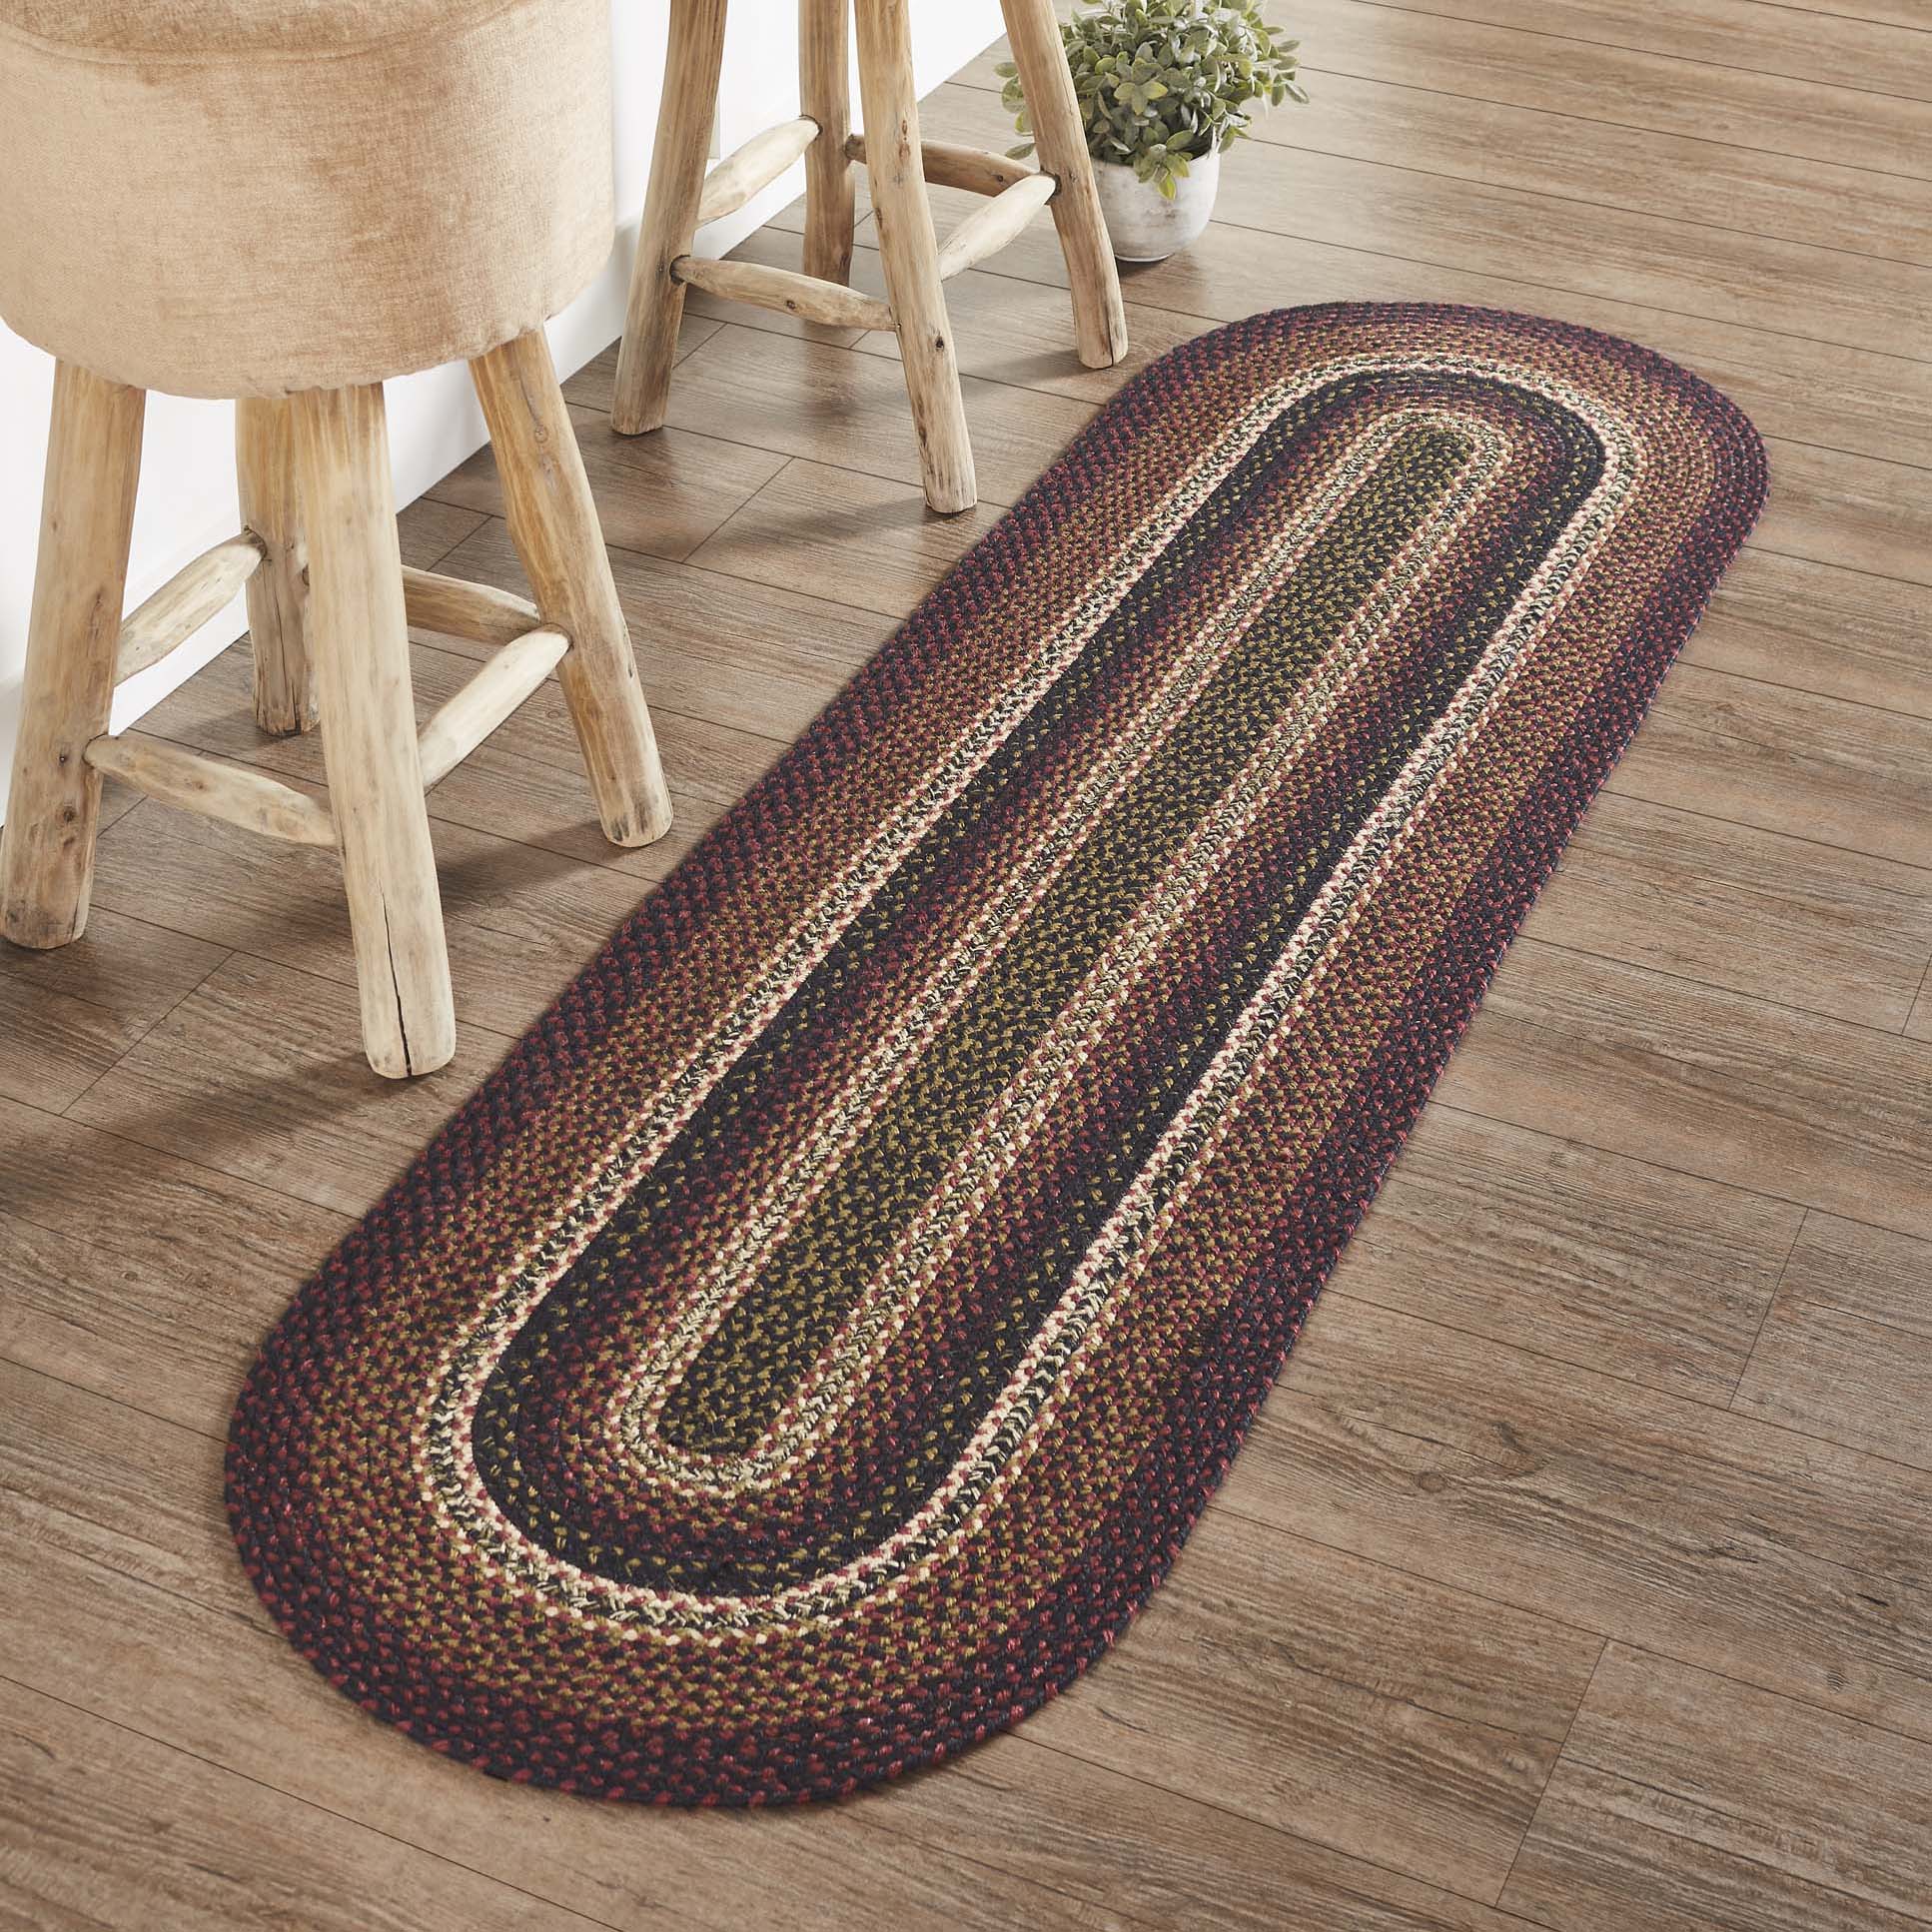 Beckham Jute Braided Rug/Runner Oval with Rug Pad 22"x72" VHC Brands